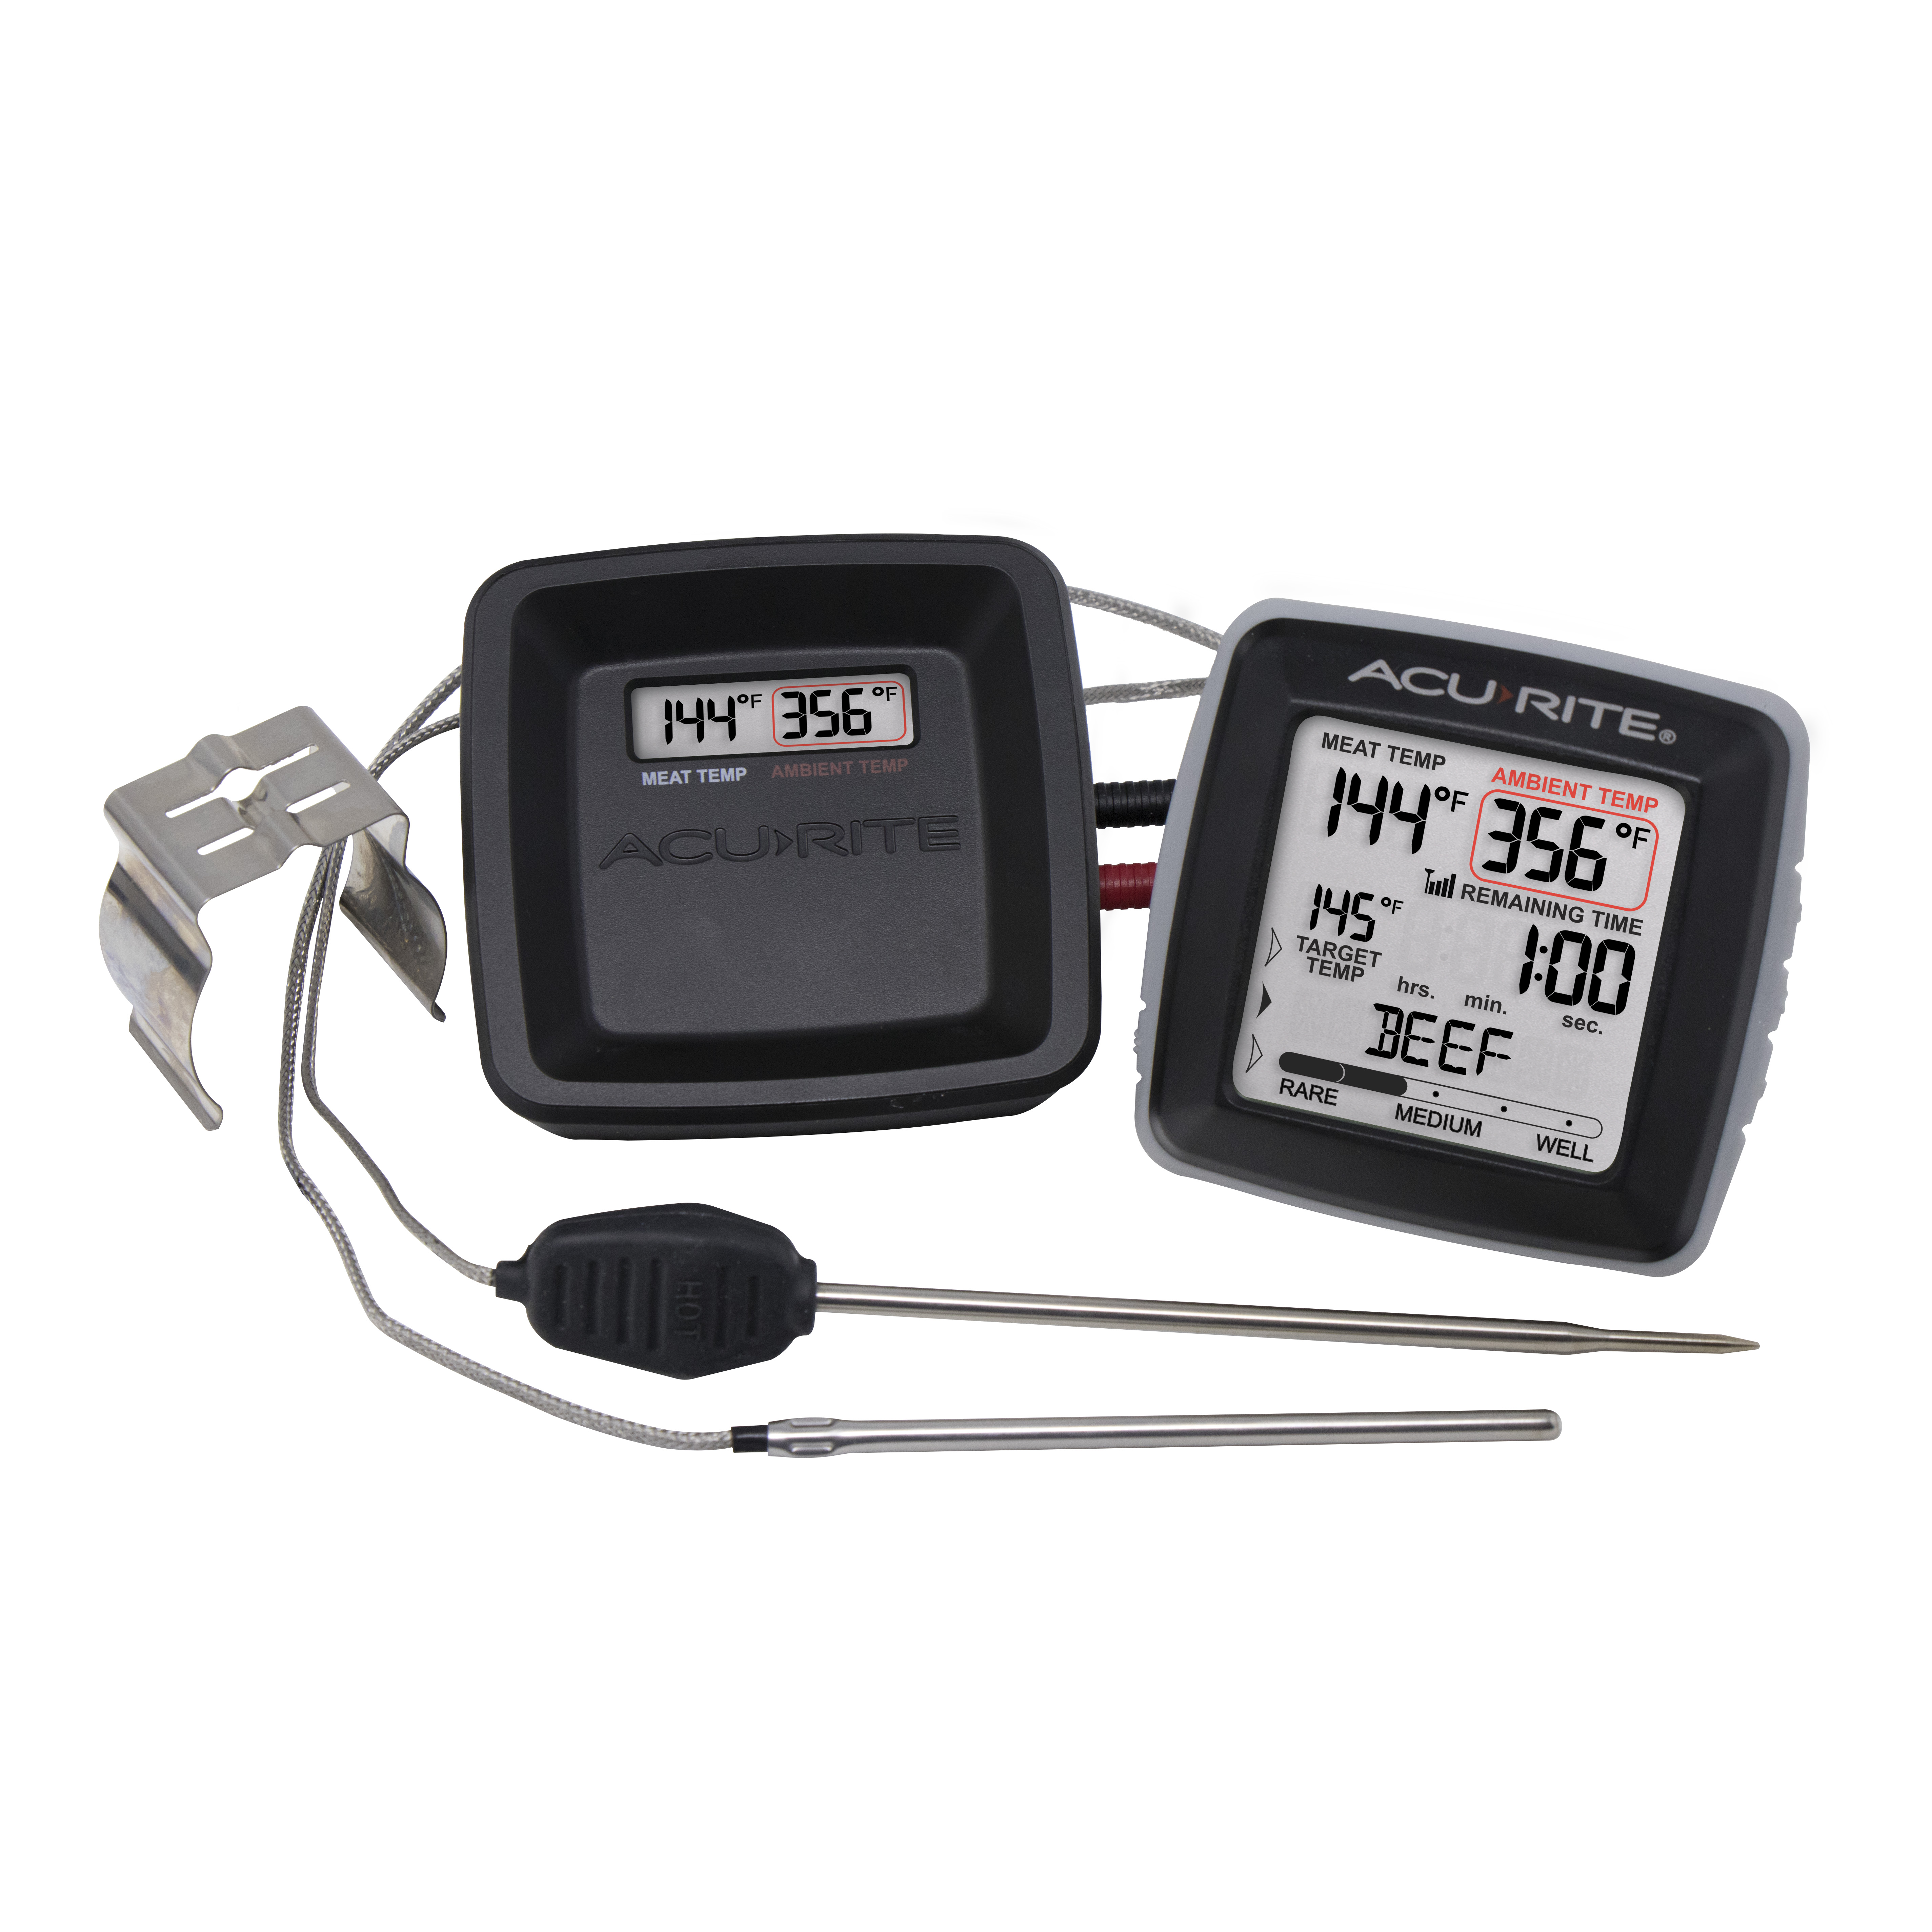 Choosing a cooking thermometer